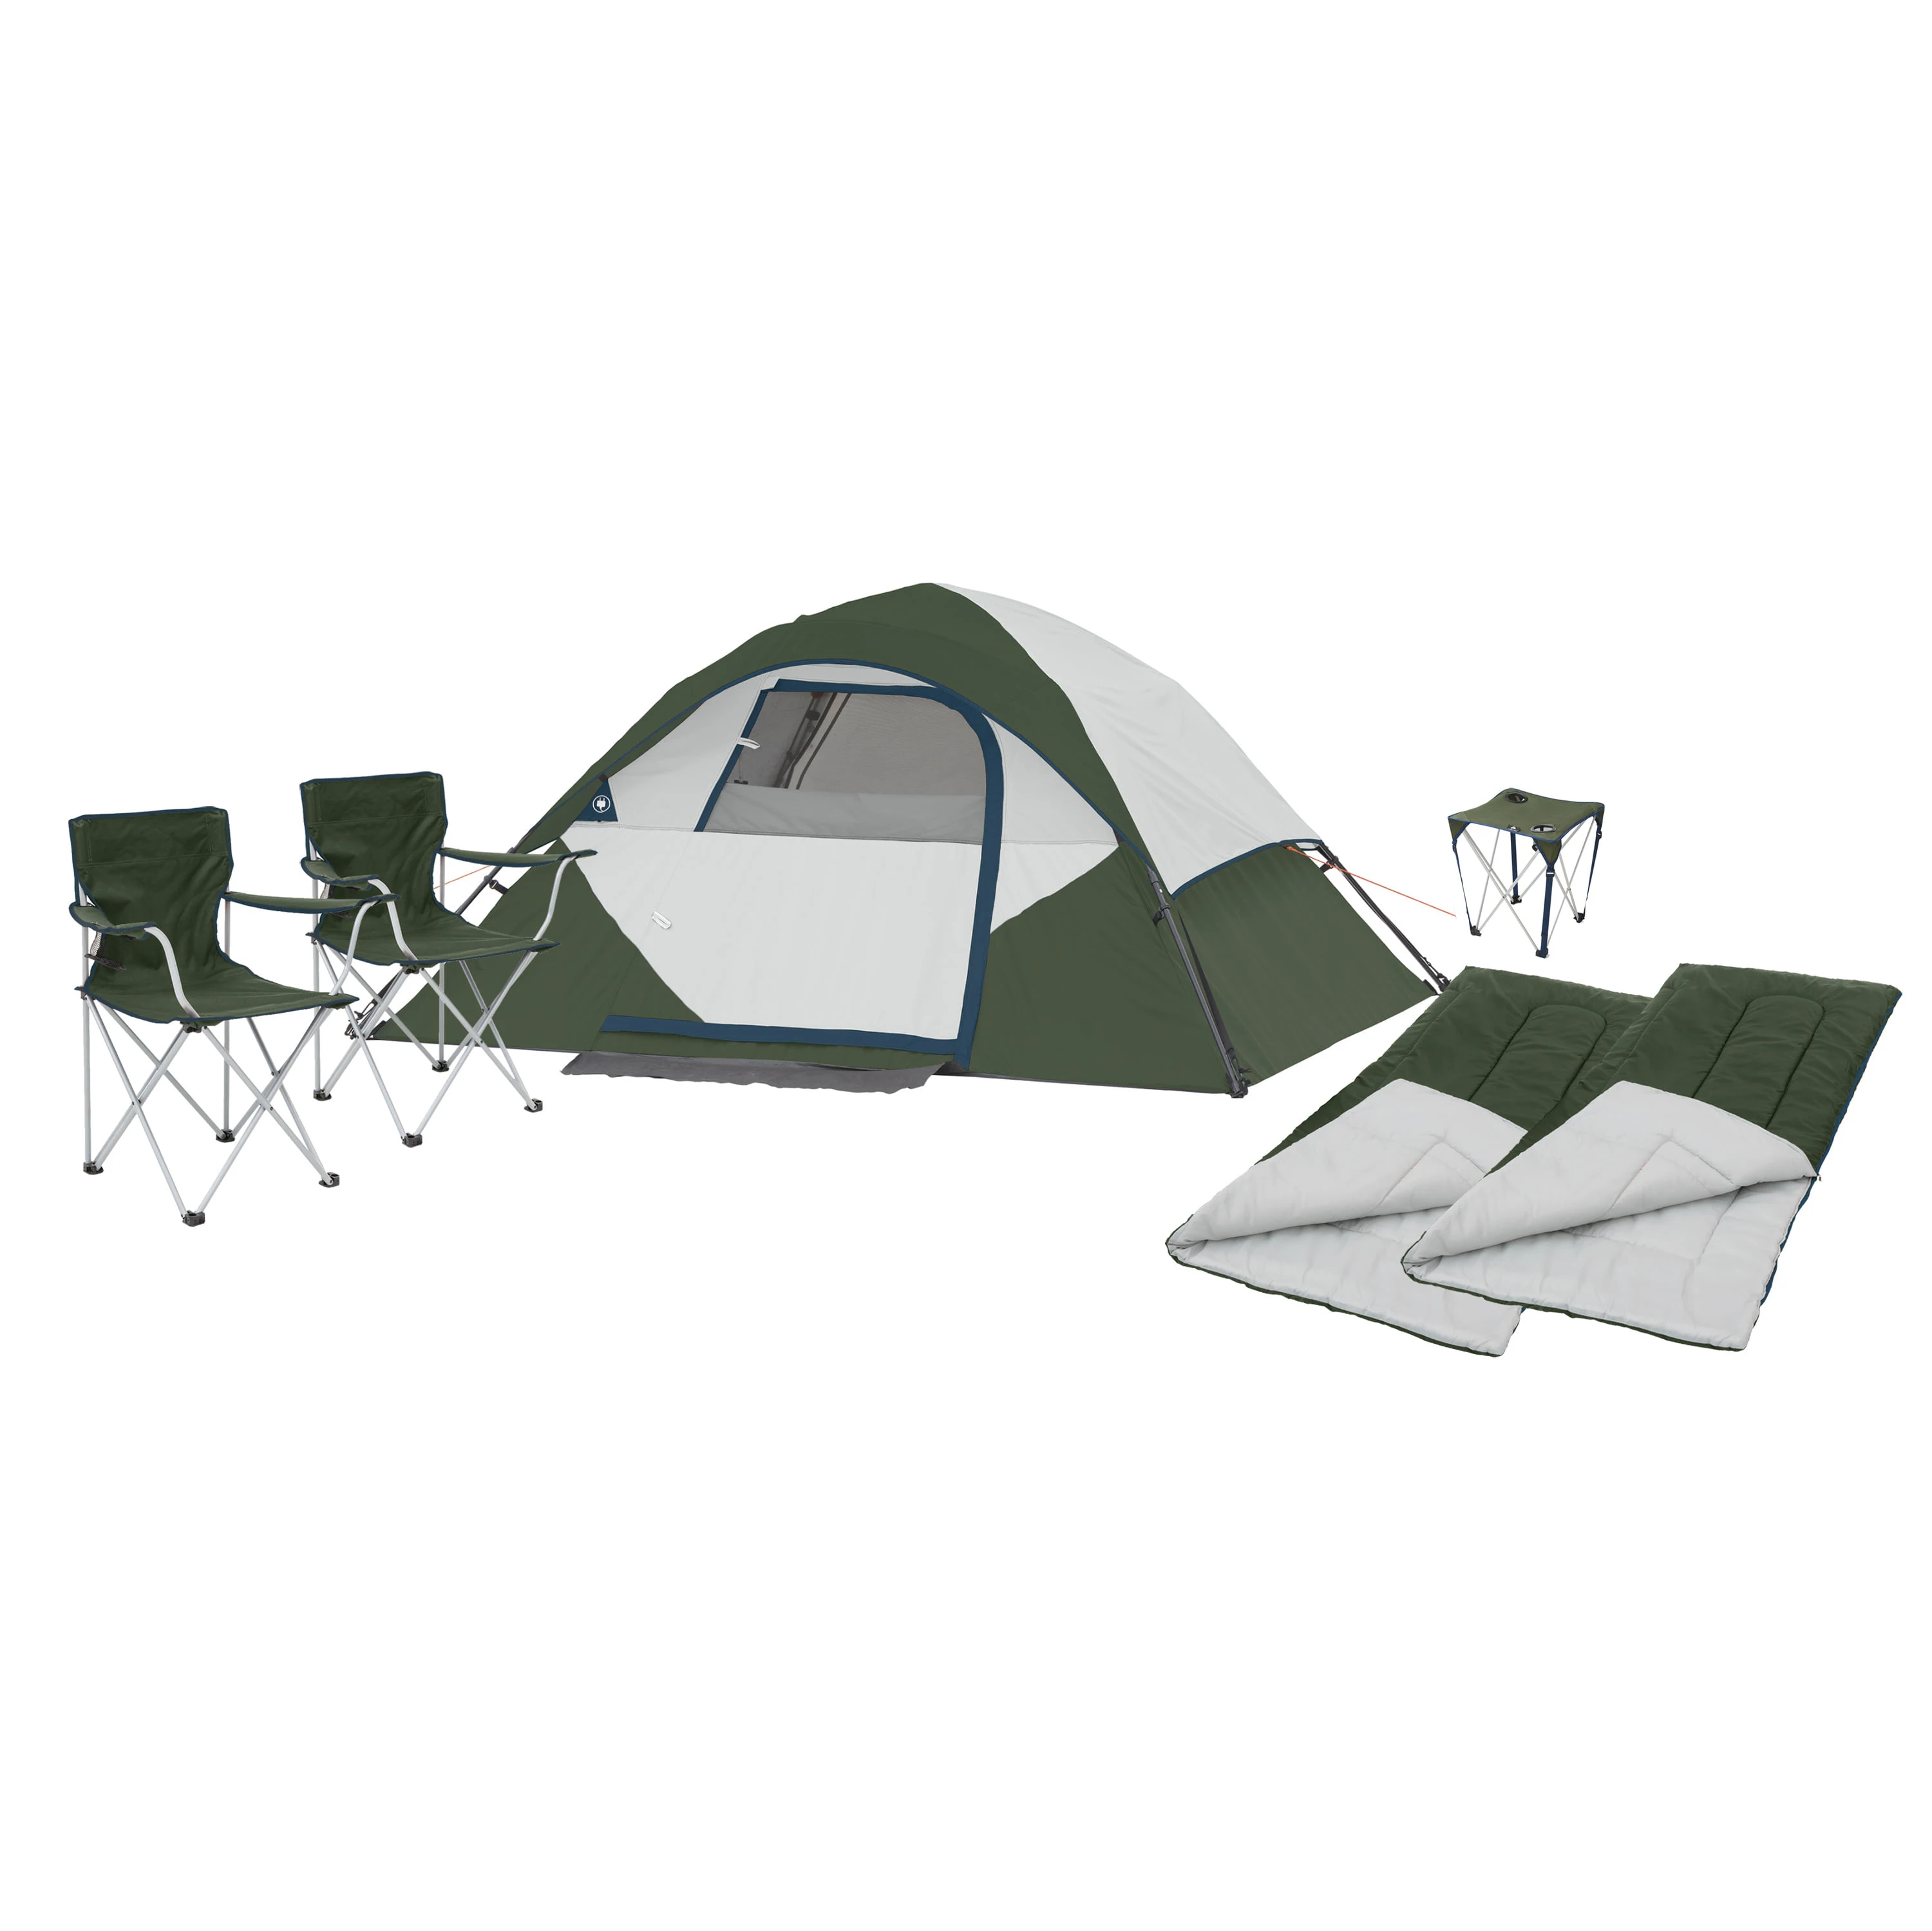 6-Piece Camping Combo -Green (Includes tent, chairs, sleeping bags, and table)